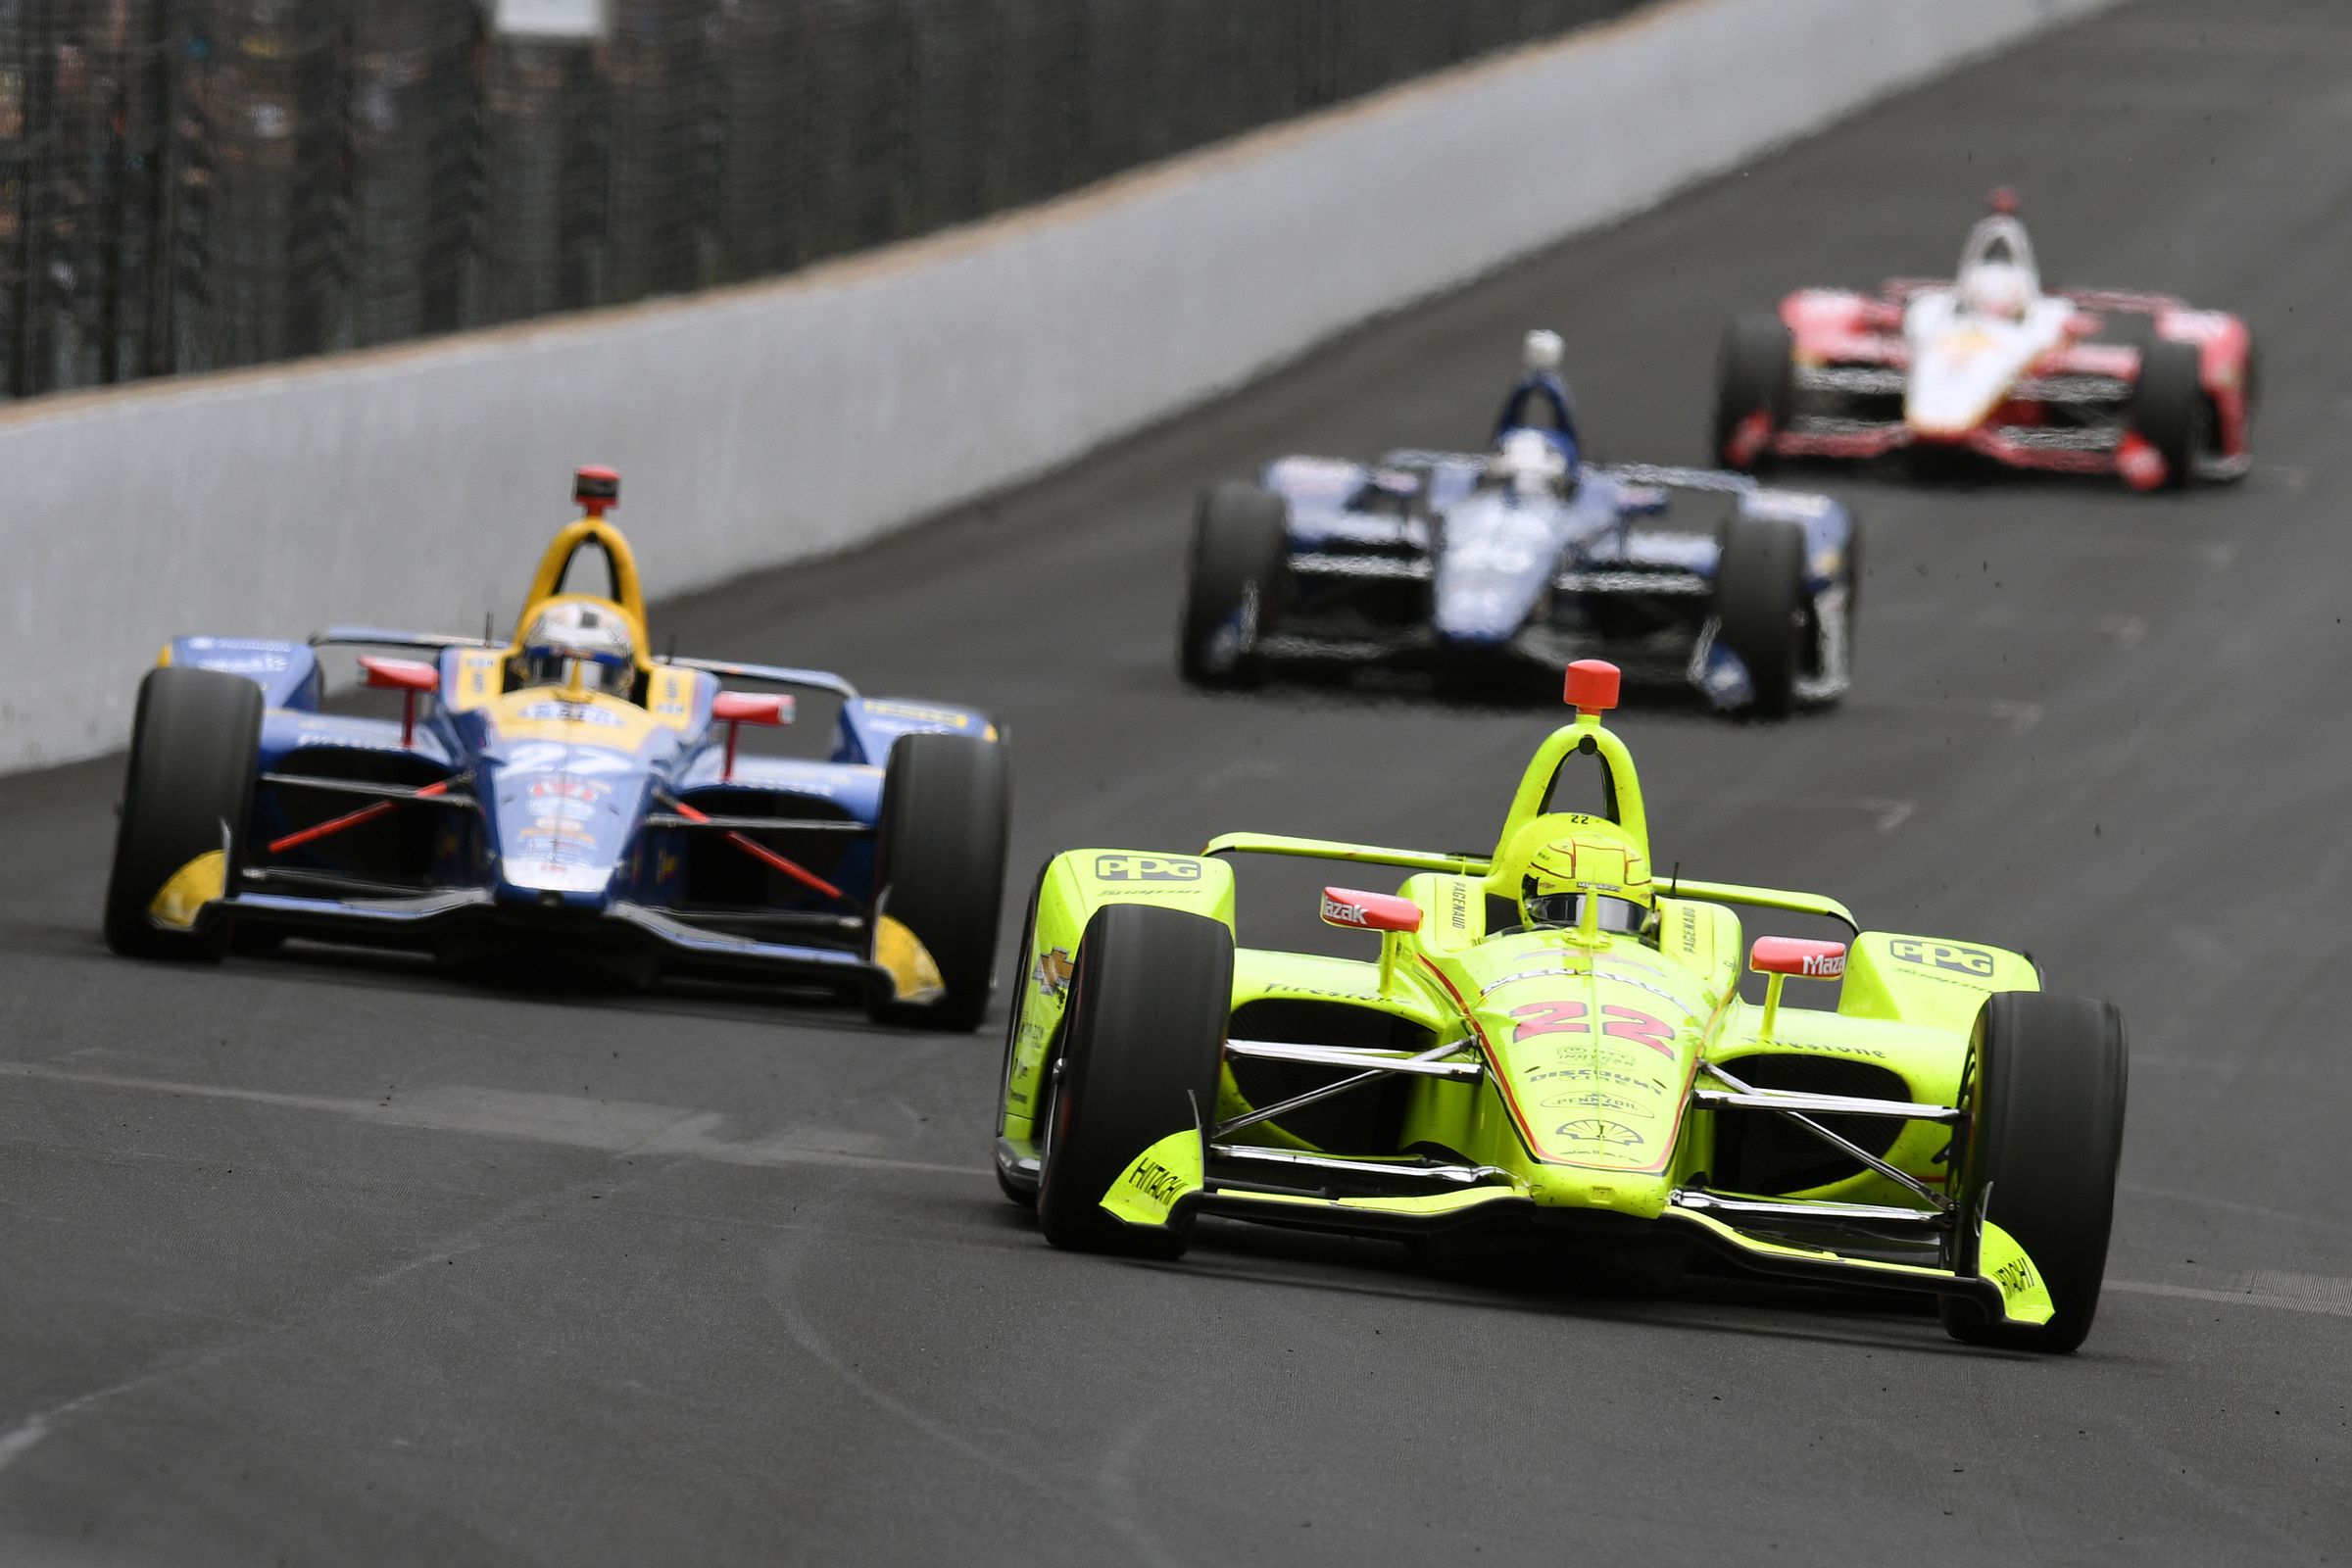 AUTO: MAY 26 IndyCar Series - 103rd Indianapolis 500